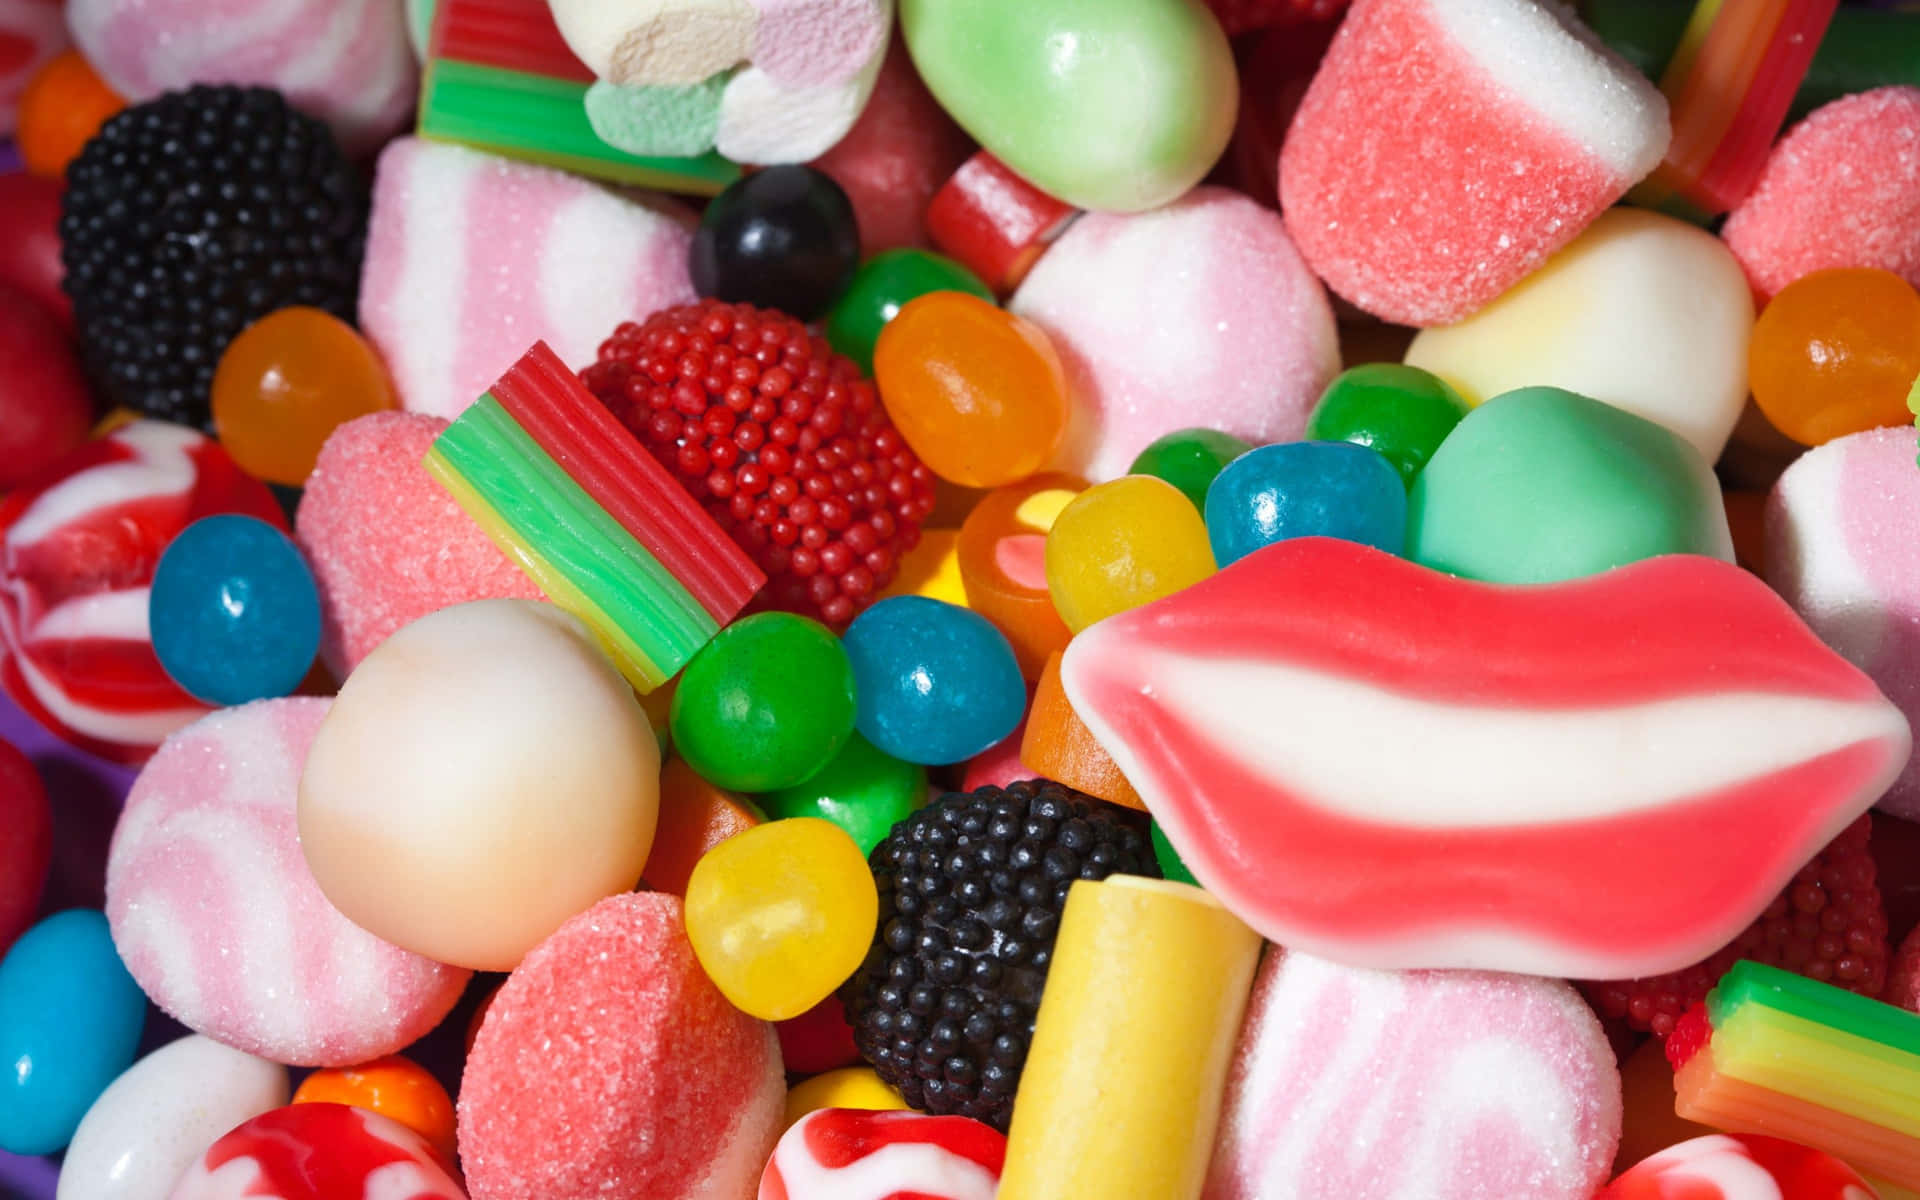 Add some sweetness to your day with this delicious candy!